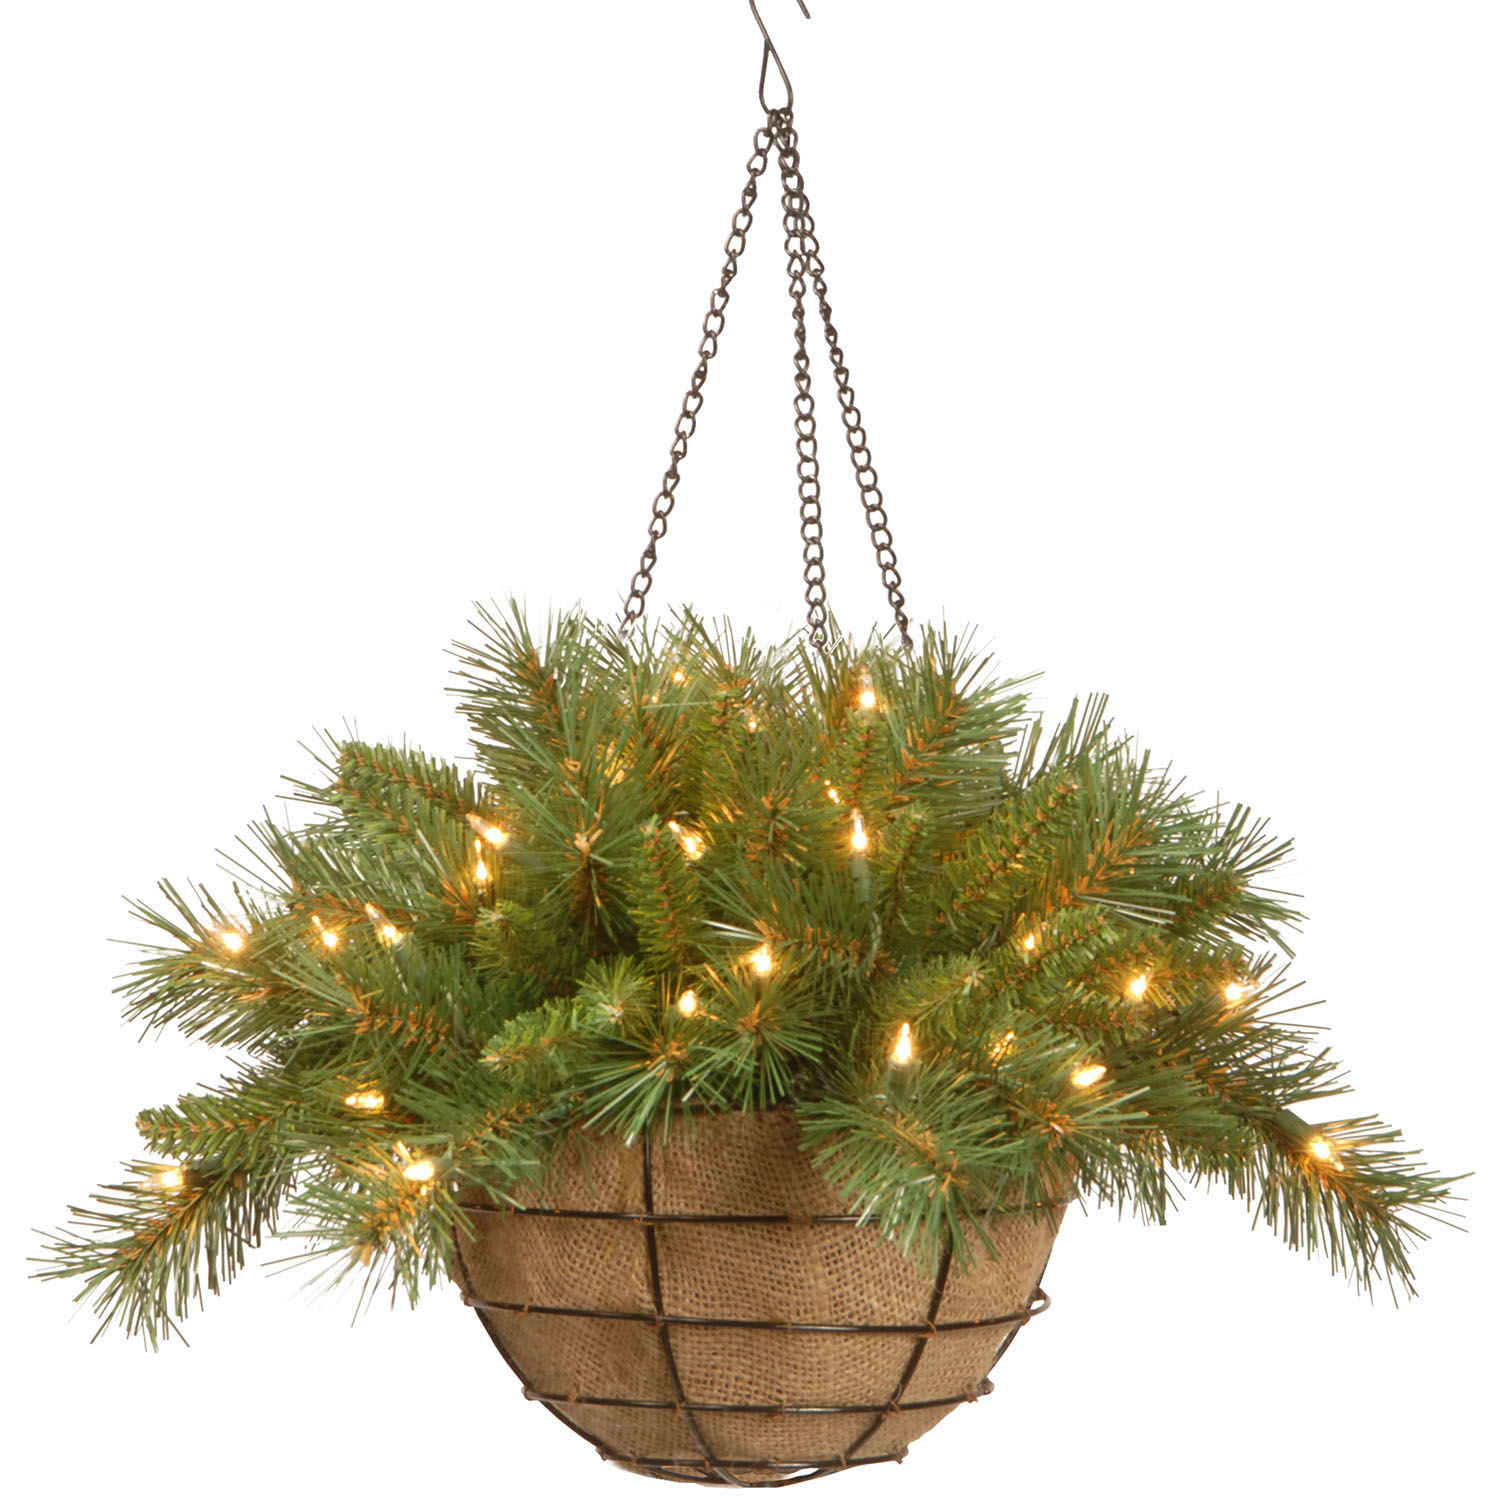 20 Inch Tiffany Fir Hanging Basket: Battery/timer Operated Leds